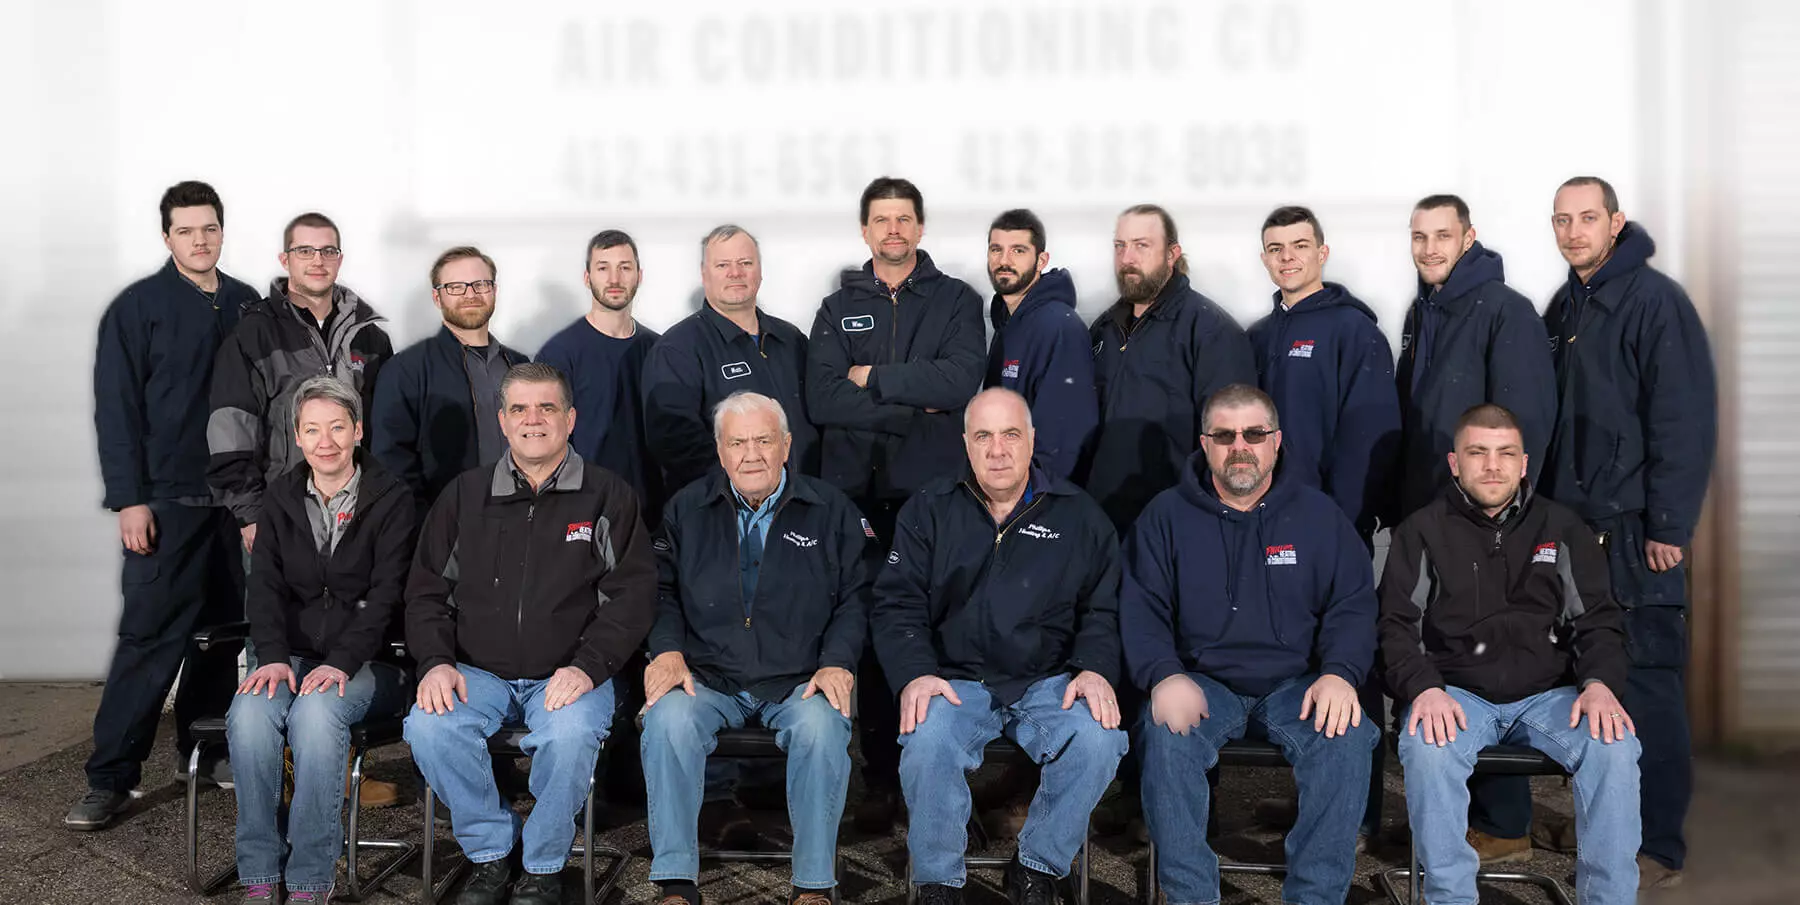 About Phillips Heating & Air Conditioning